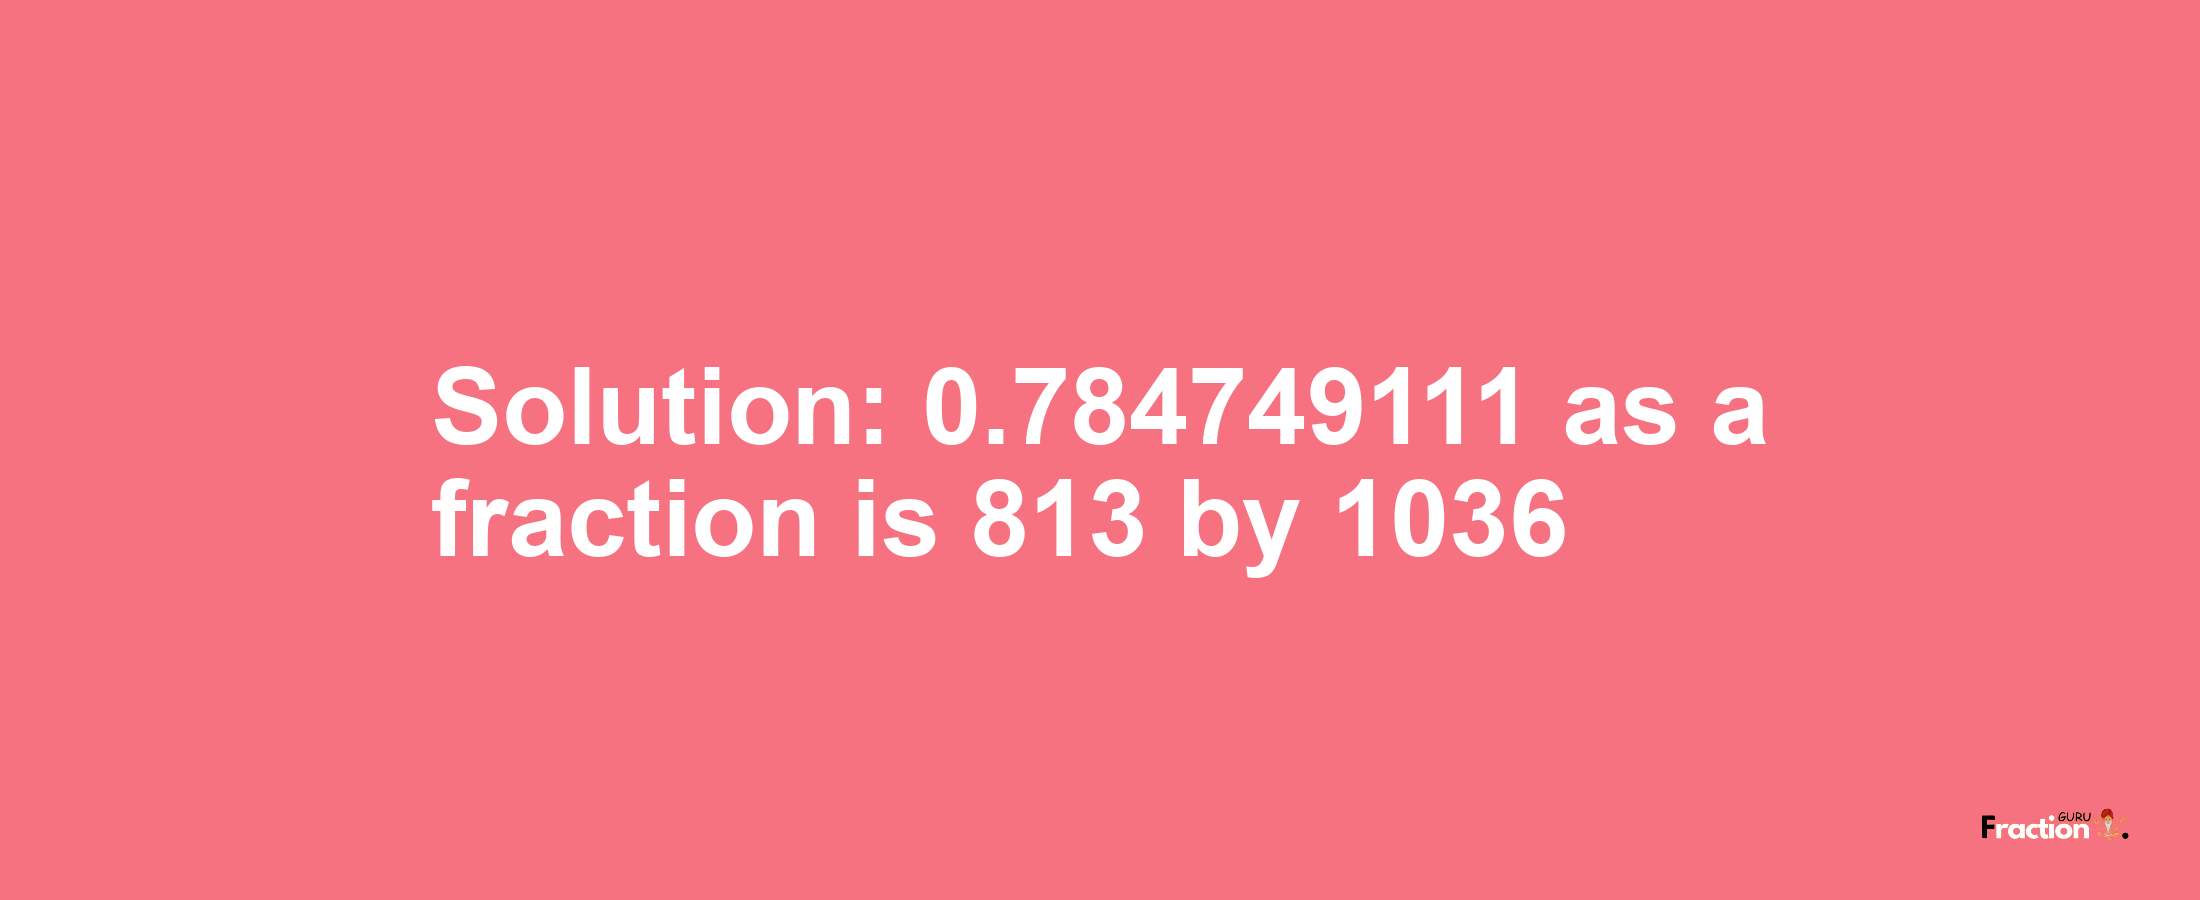 Solution:0.784749111 as a fraction is 813/1036